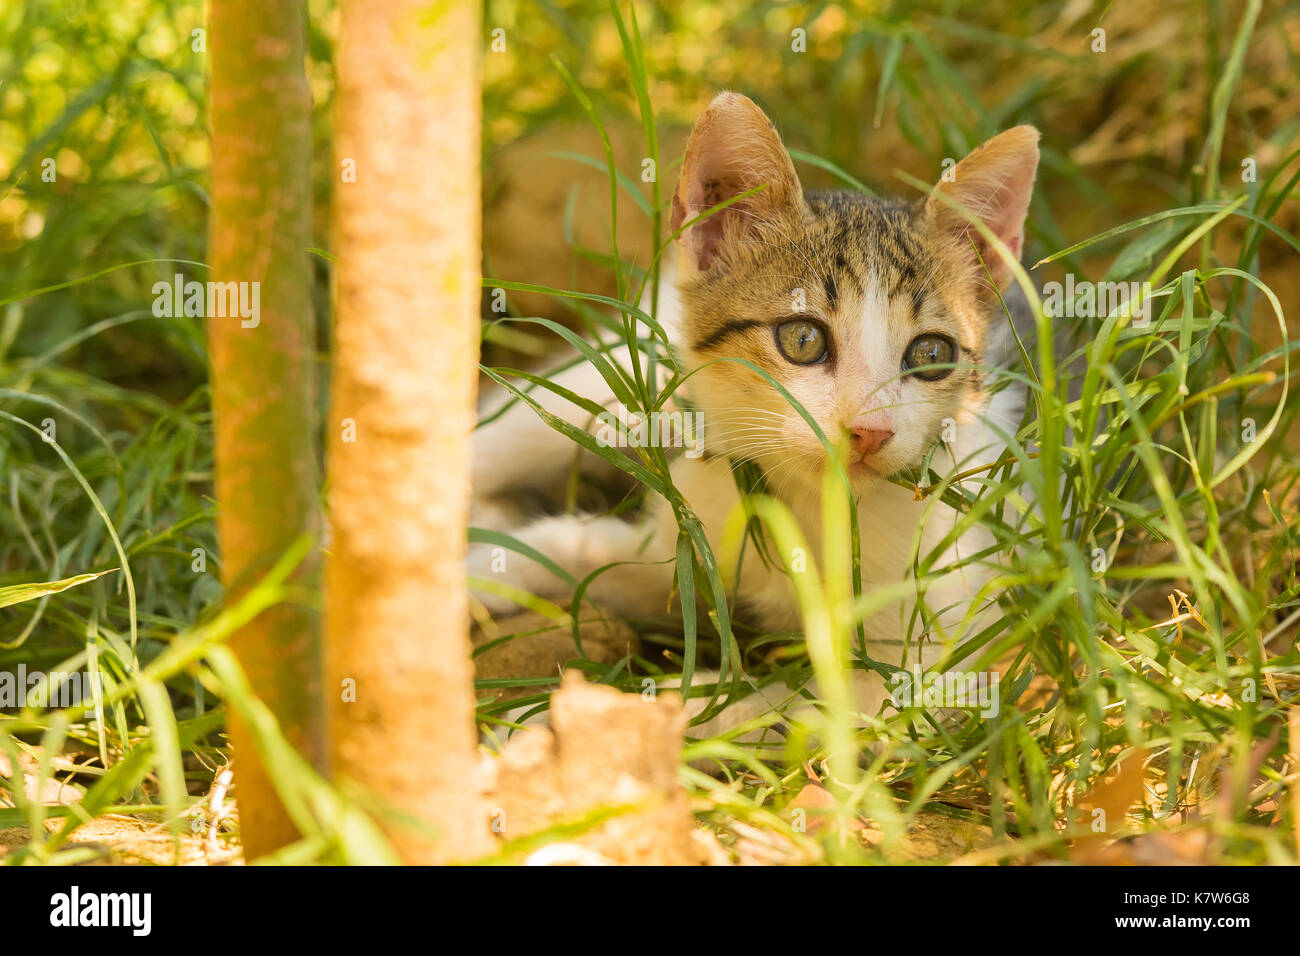 Cute baby cat portrait against a beautiful background. Stock Photo